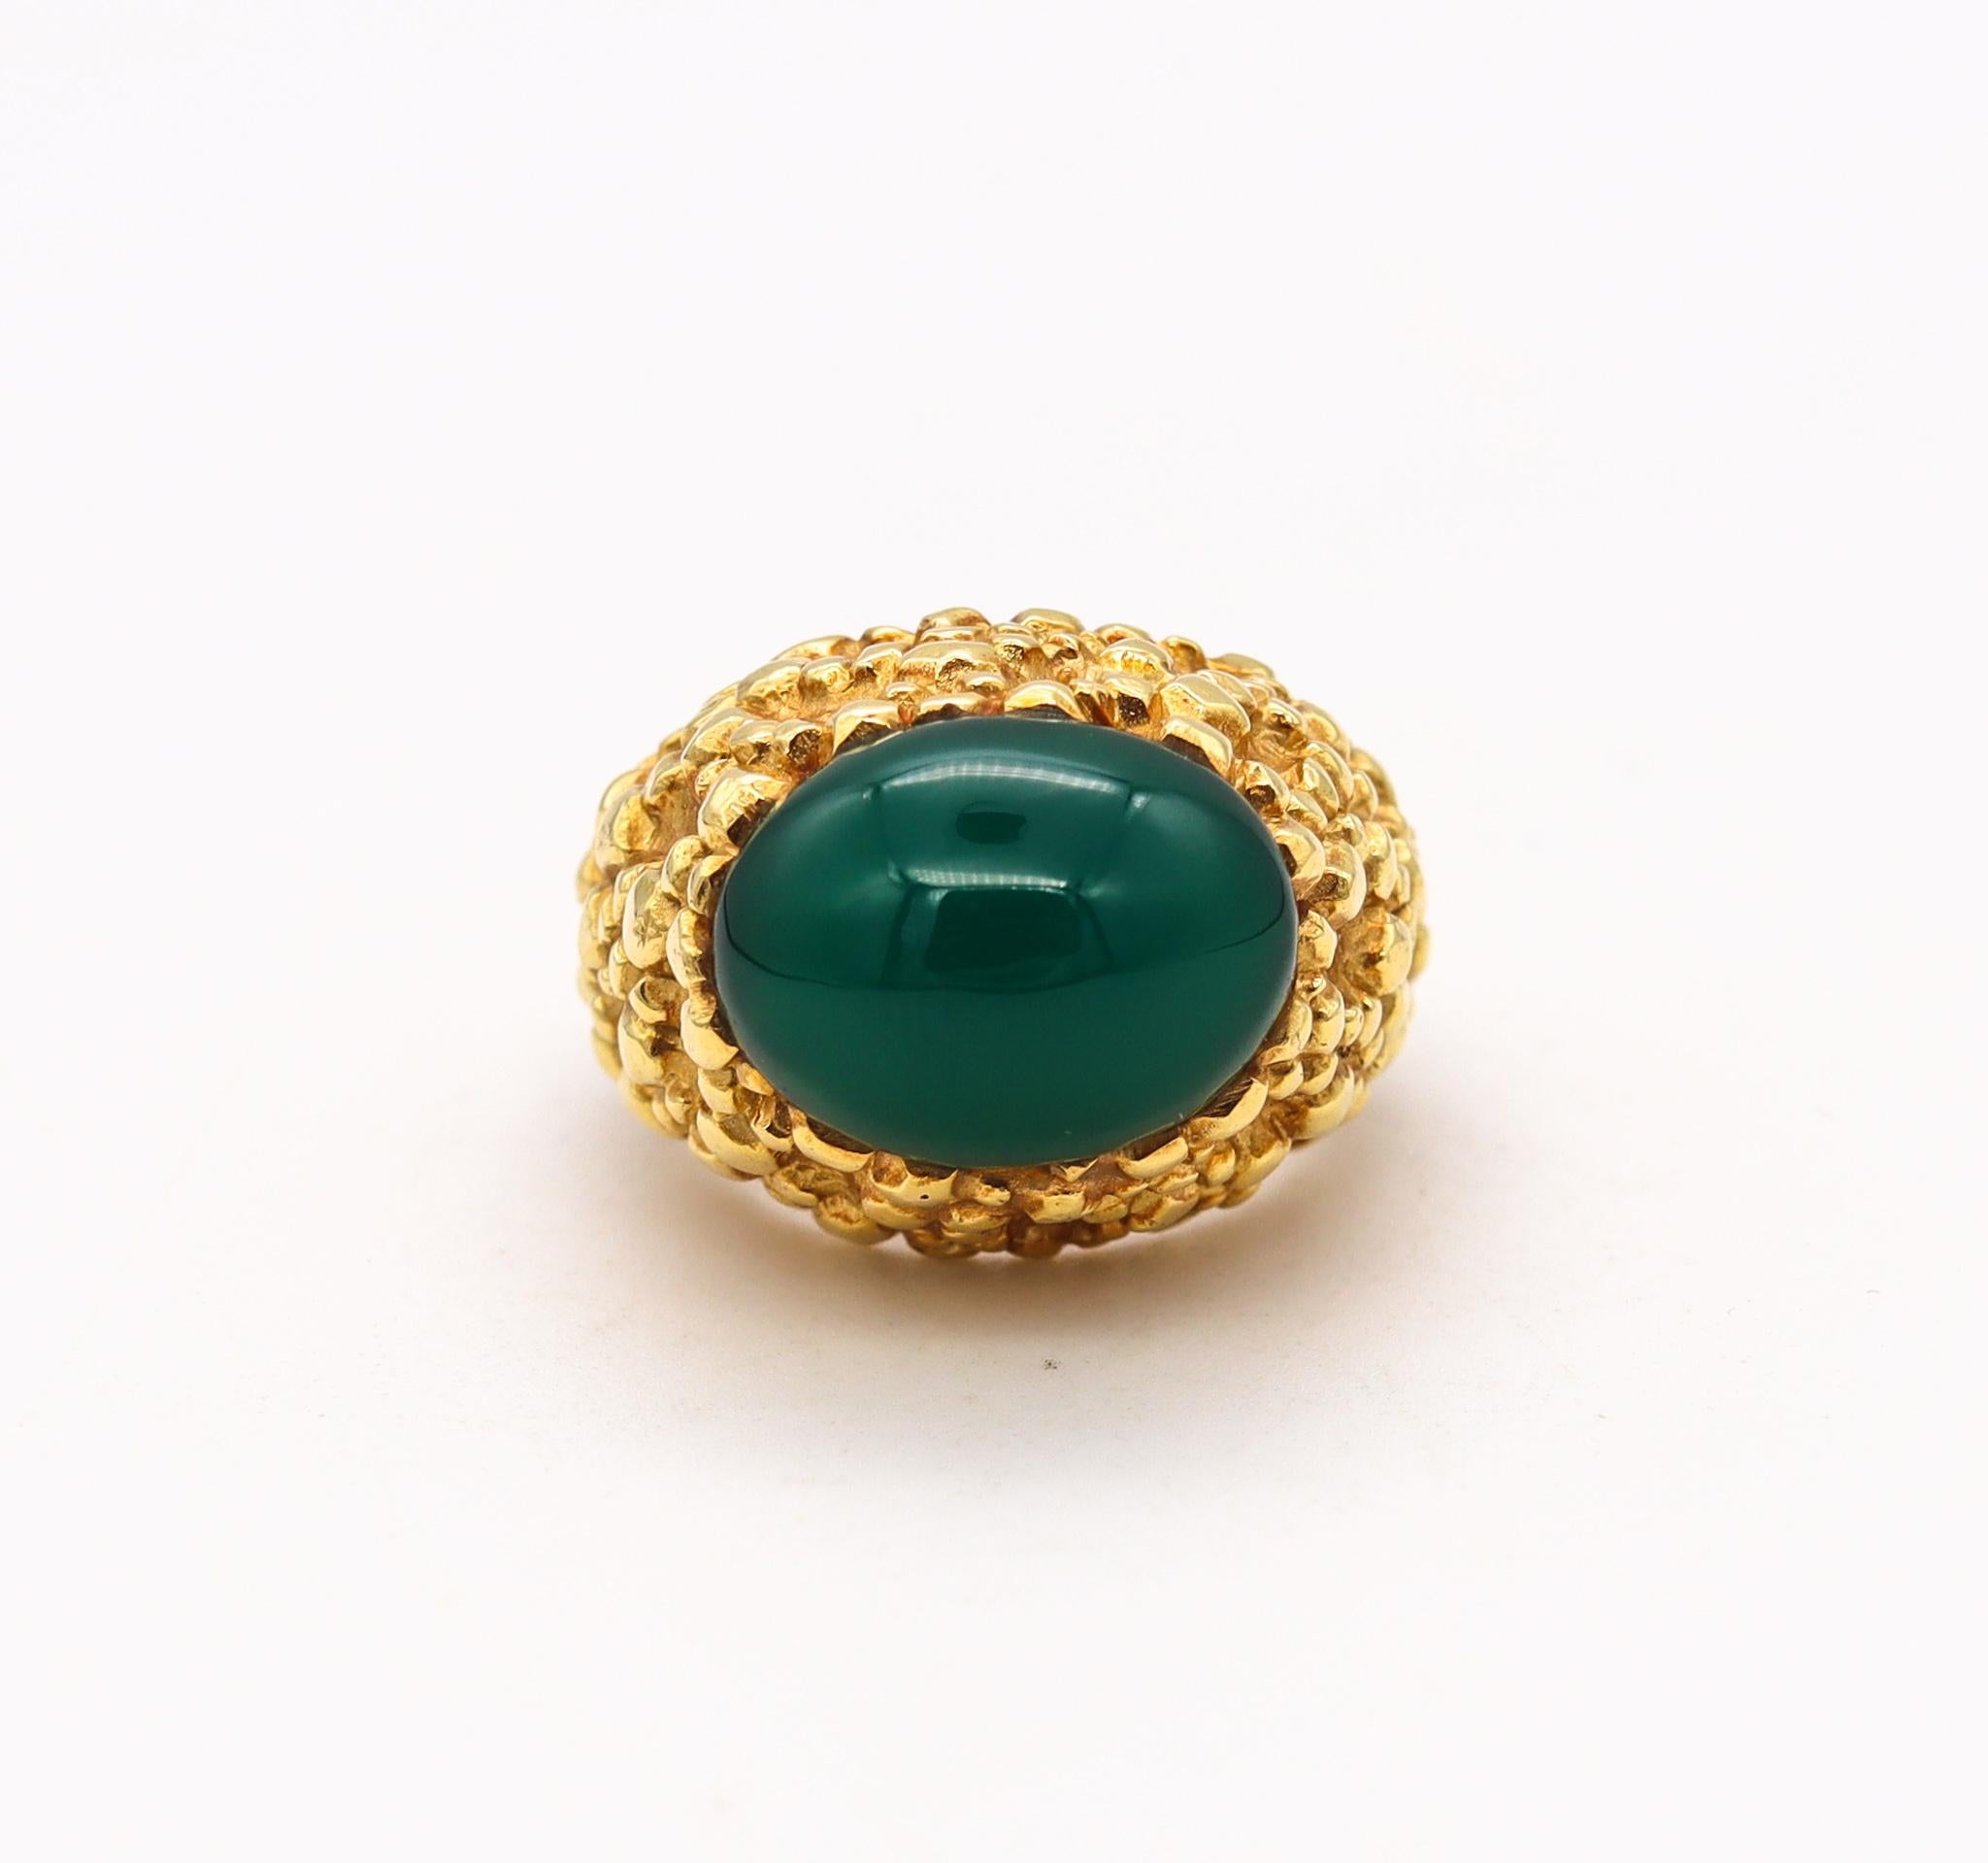 Women's or Men's Van Cleef & Arpels 1970 Paris Cocktail Ring 18kt Gold with 8.27 Cts Chrysoprase